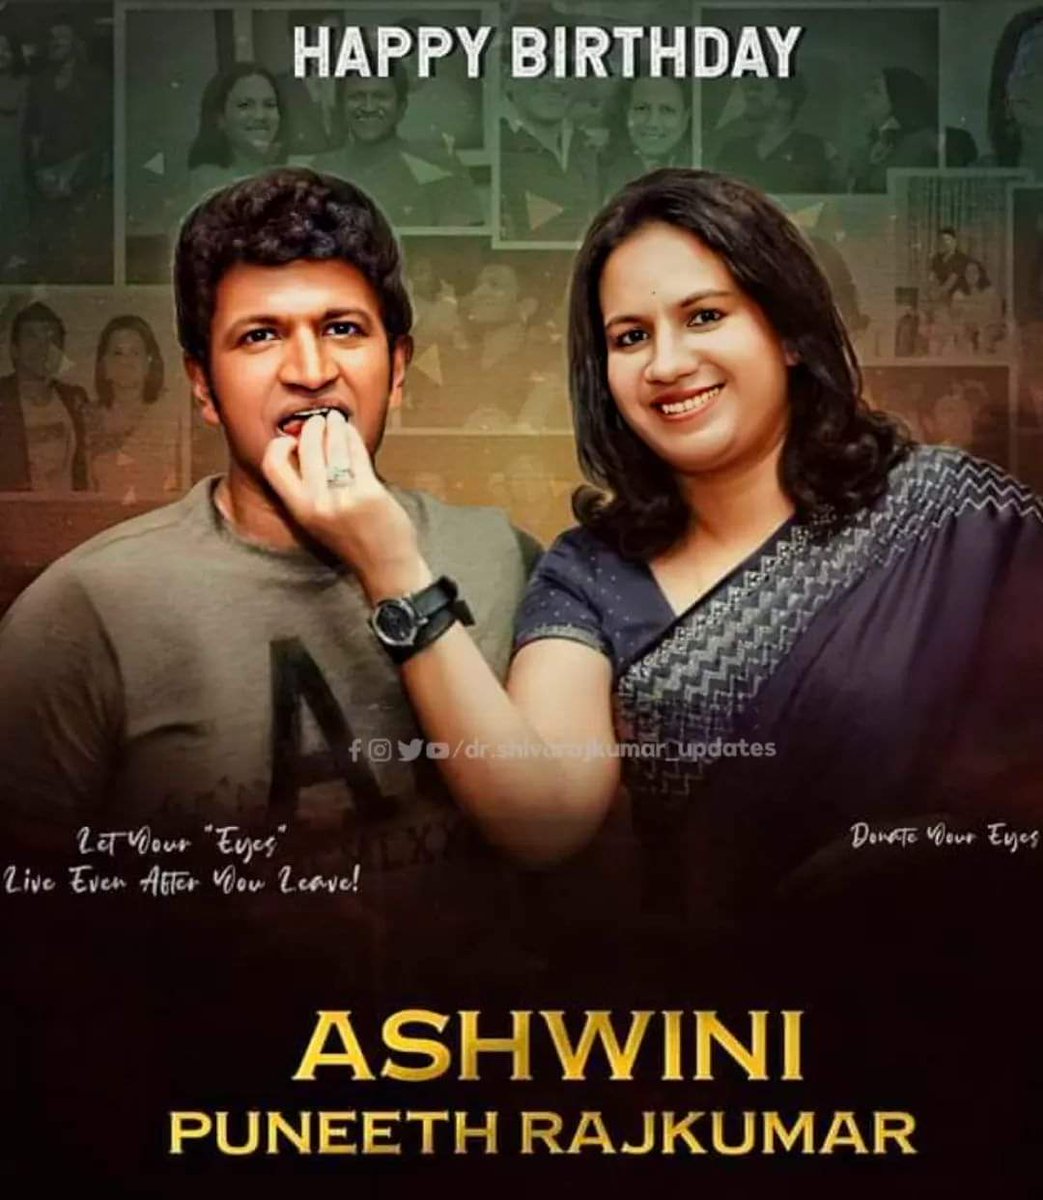 Wish You happy Birthday @Ashwini_PRK Madam
May Bless you and Your family ❤️
Wishes from #AnushkaShettyFans #AnushkaShetty #Anushka48 #Sweetyshetty 

#AshwiniPuneethRajkumar #HappyBirthdayAshwiniPuneethRajkumar #DrPuneethRajkumar #PuneethRajkumar